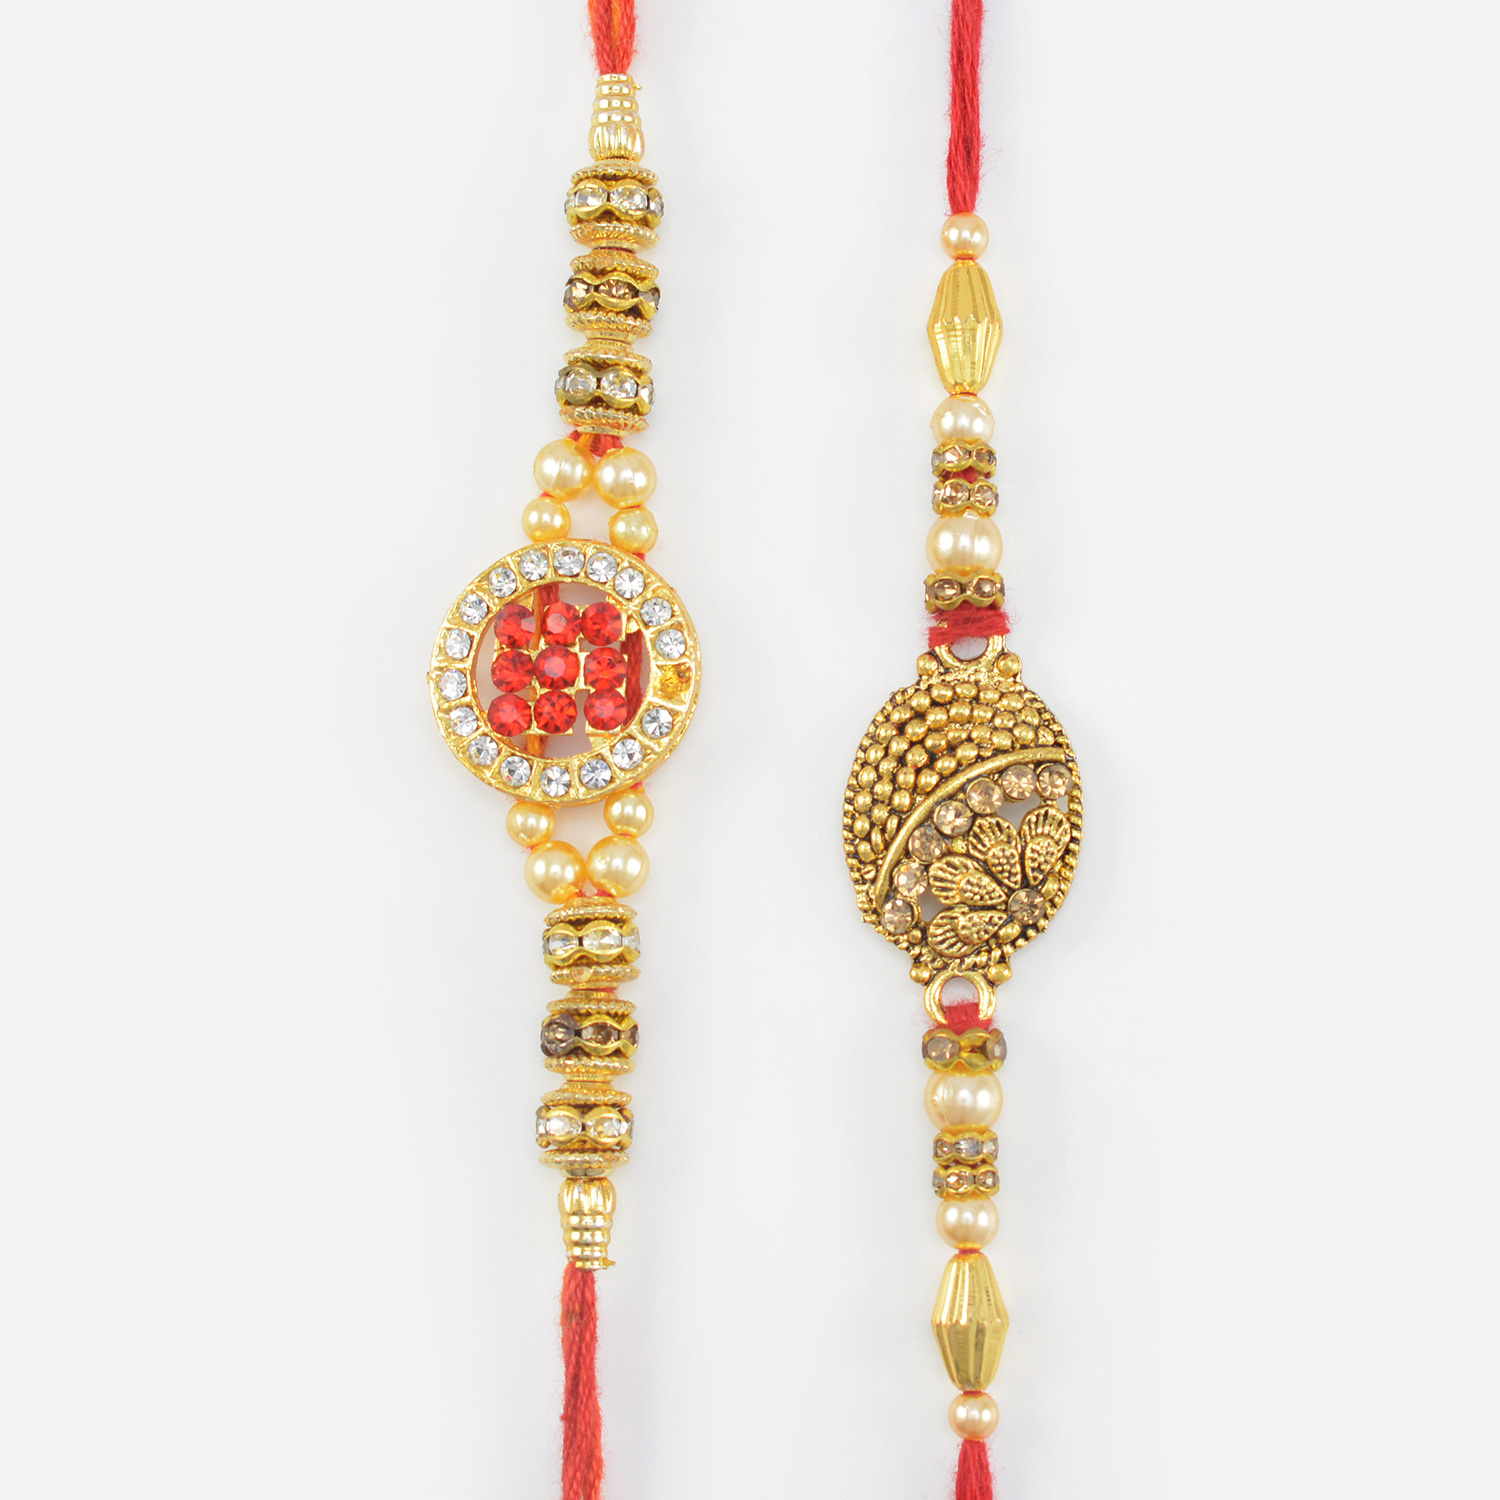 Ring of Stones and Gold, Nicely Pattern Two Handcrafted Rakhis for Brother